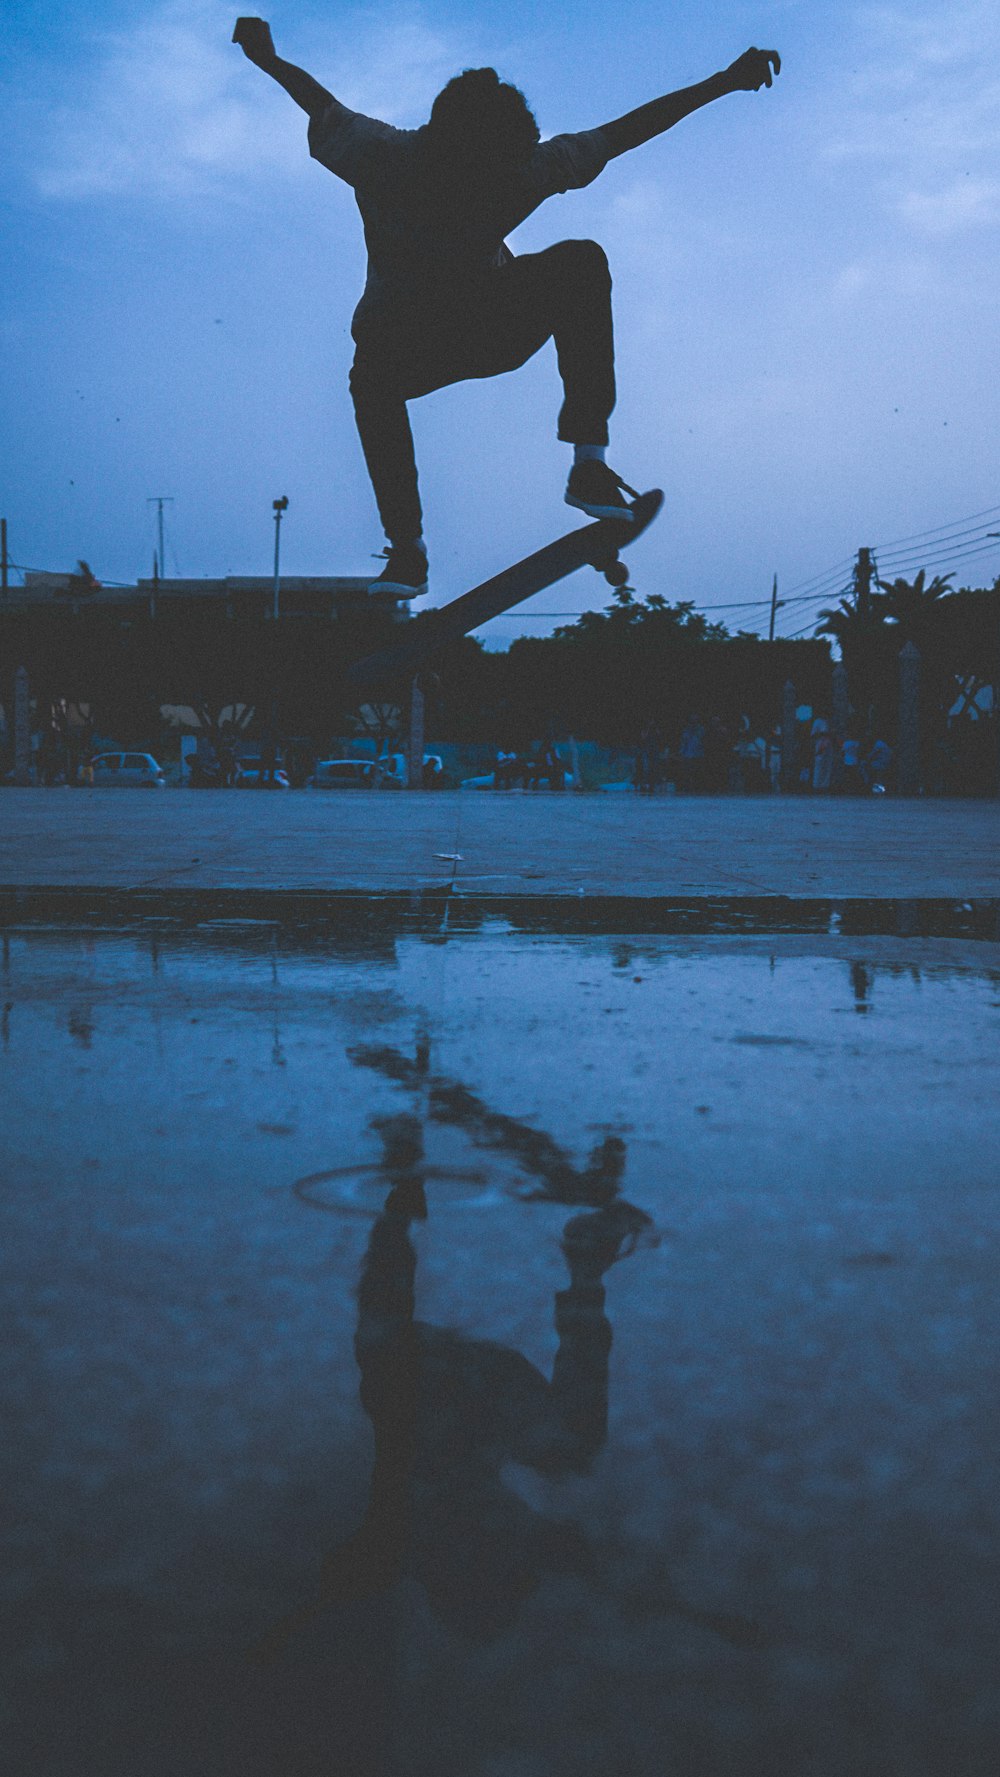 silhouette of person jumps with skateboard